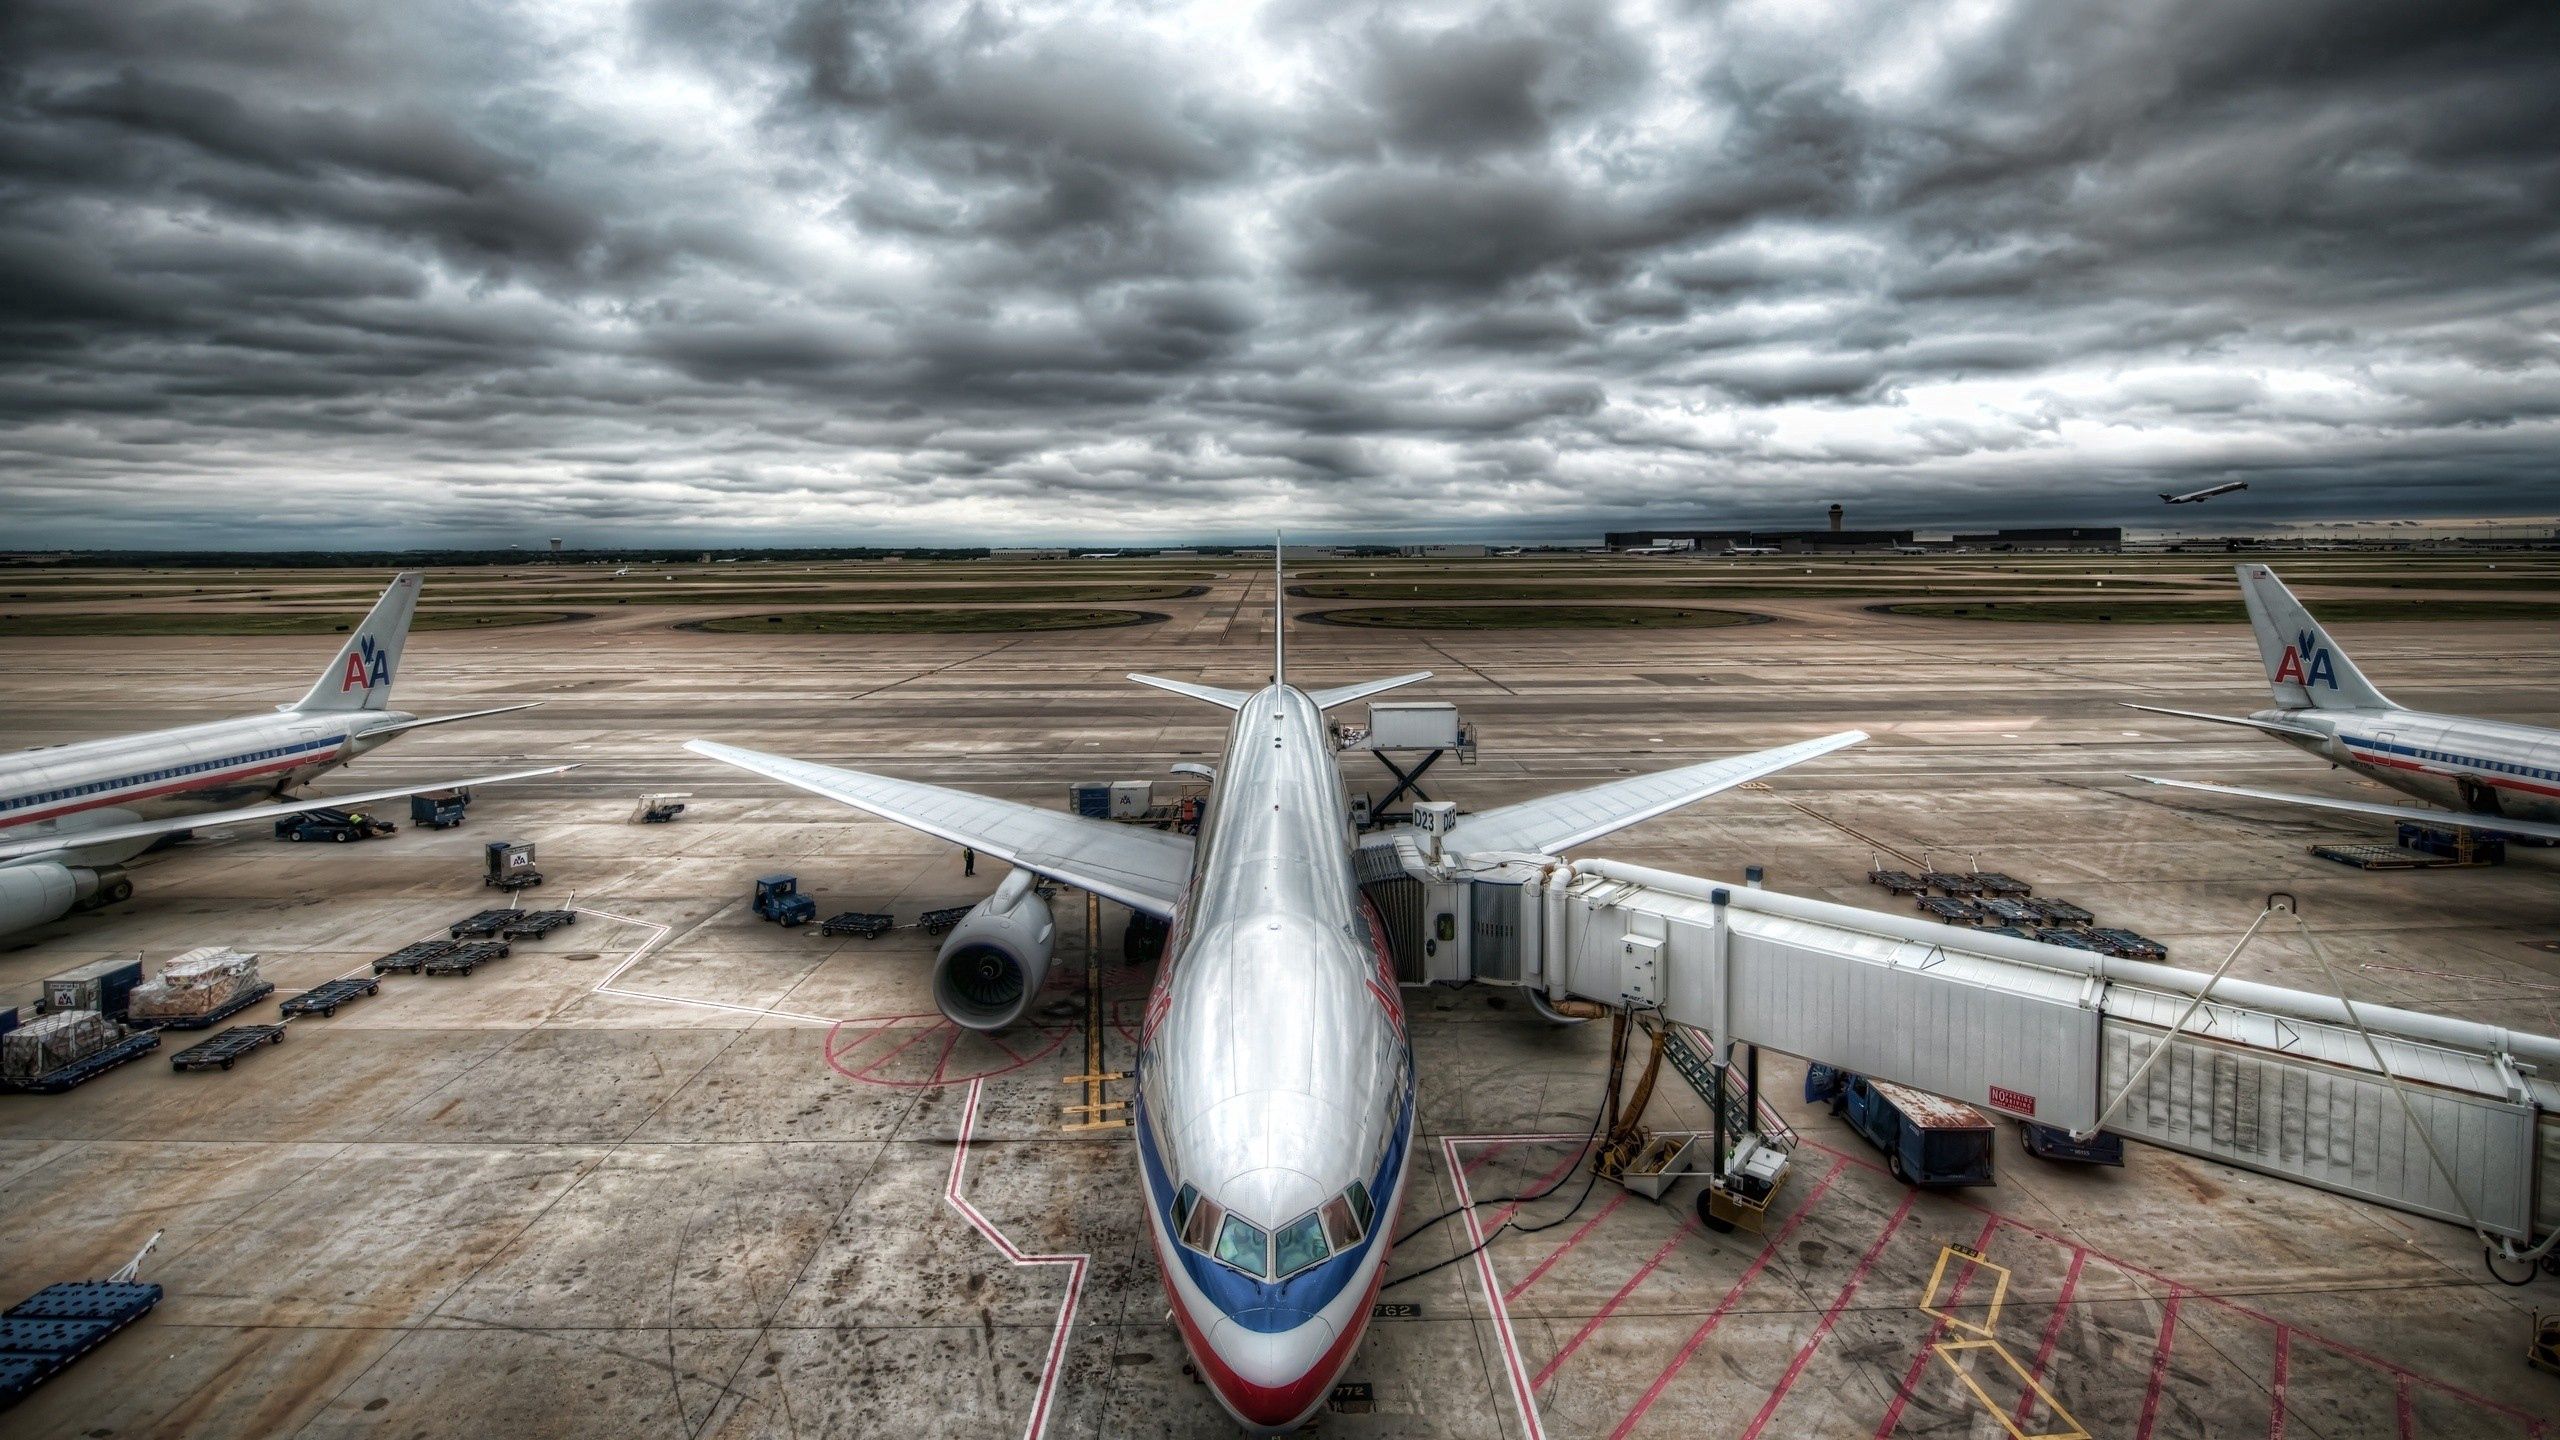 android plane, airplane, sky, clouds, miscellanea, miscellaneous, hdr, airport